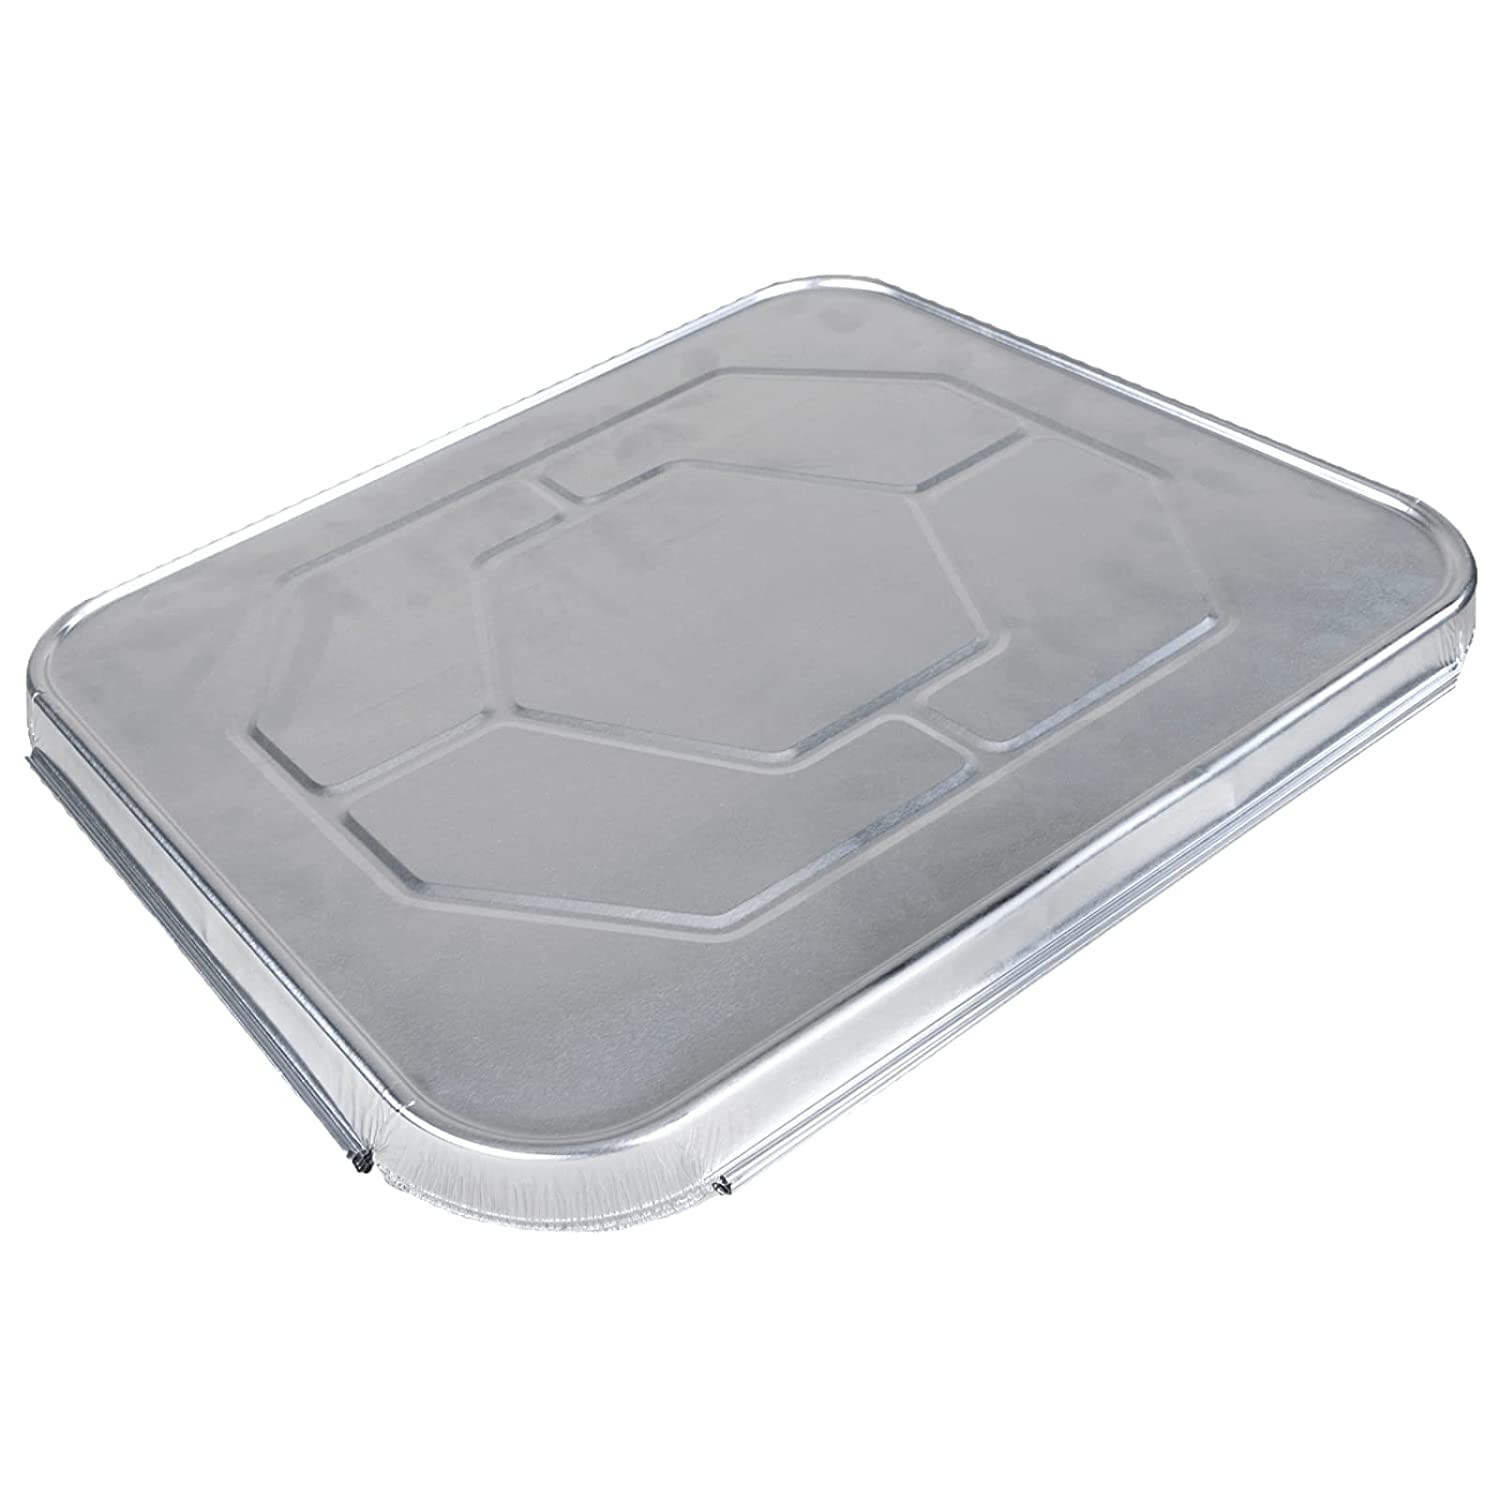 Aluminum Foil Pans 21x13 (15 Pack) Full Size Disposable Trays for Steam  Table, Food, Grills, Baking, BBQ